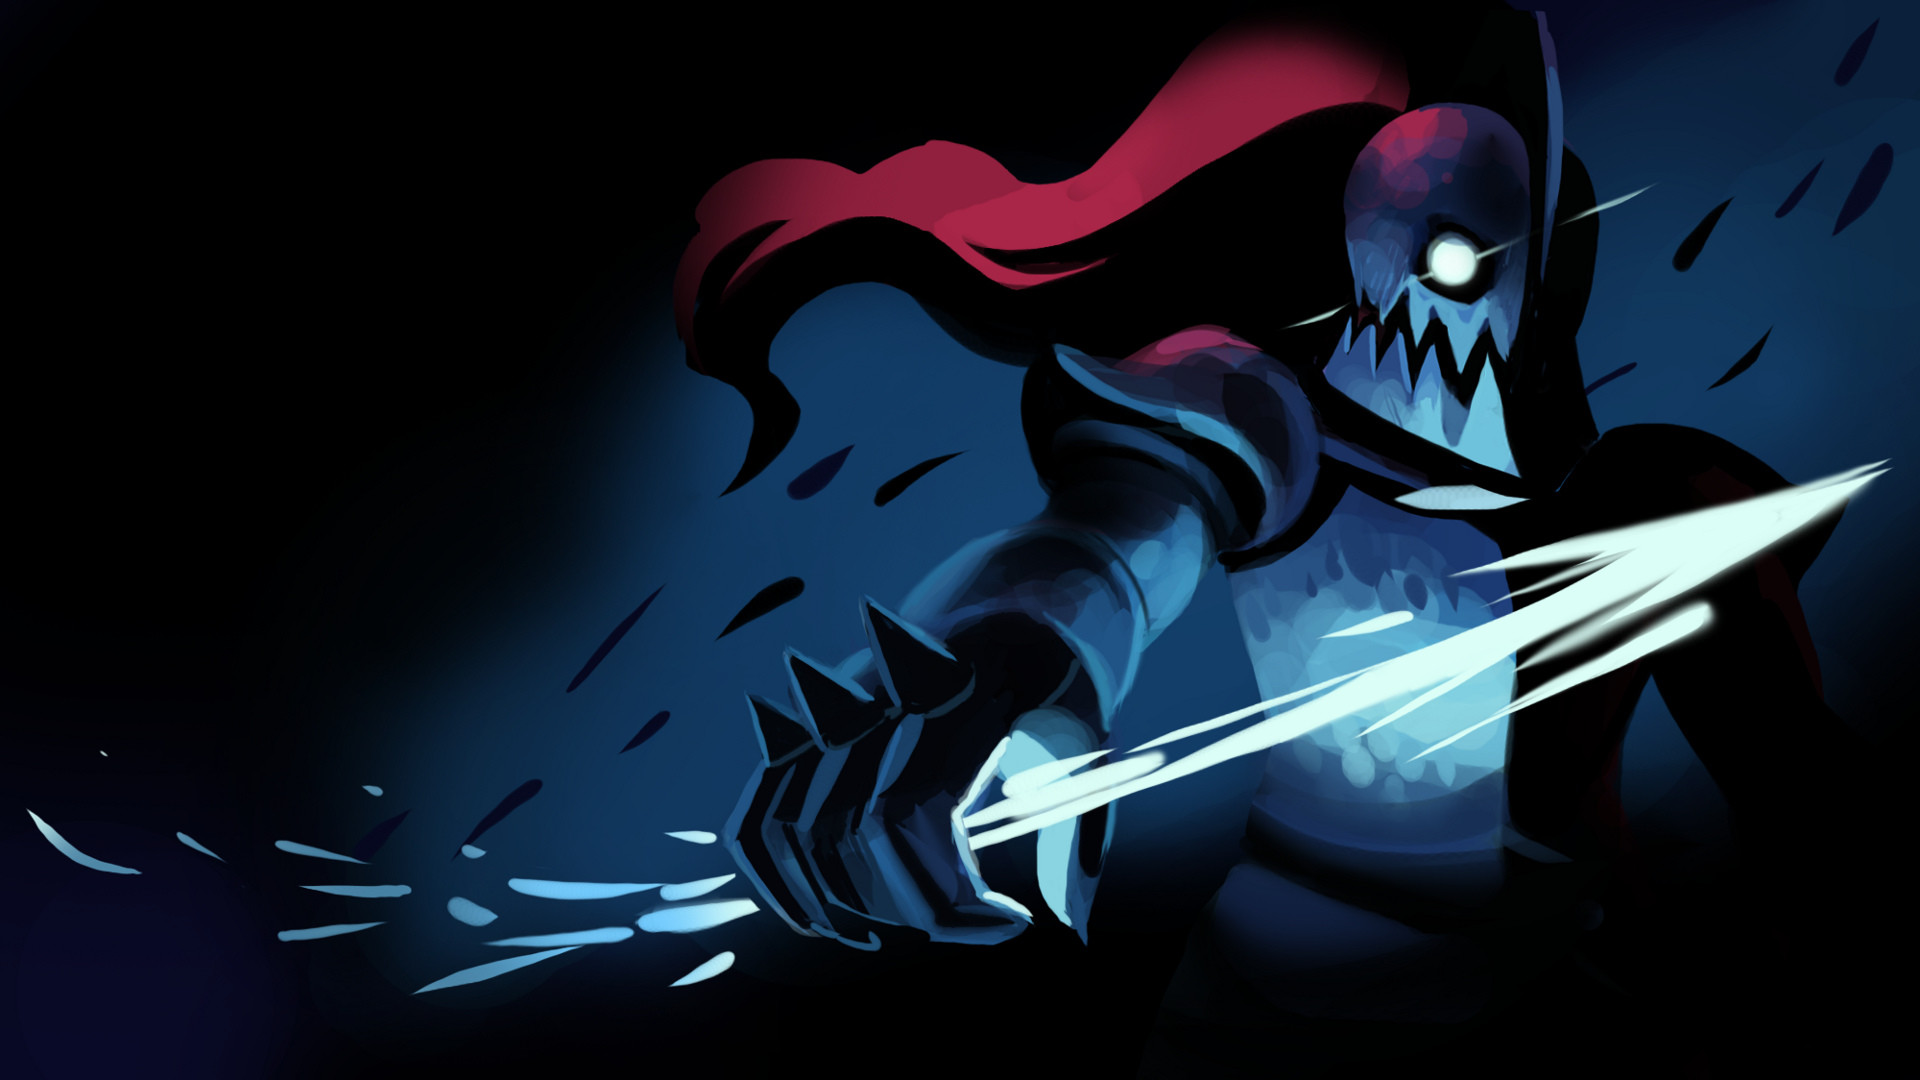 UNDERTALE-The Game images Undyne Wallpaper HD wallpaper and background  photos